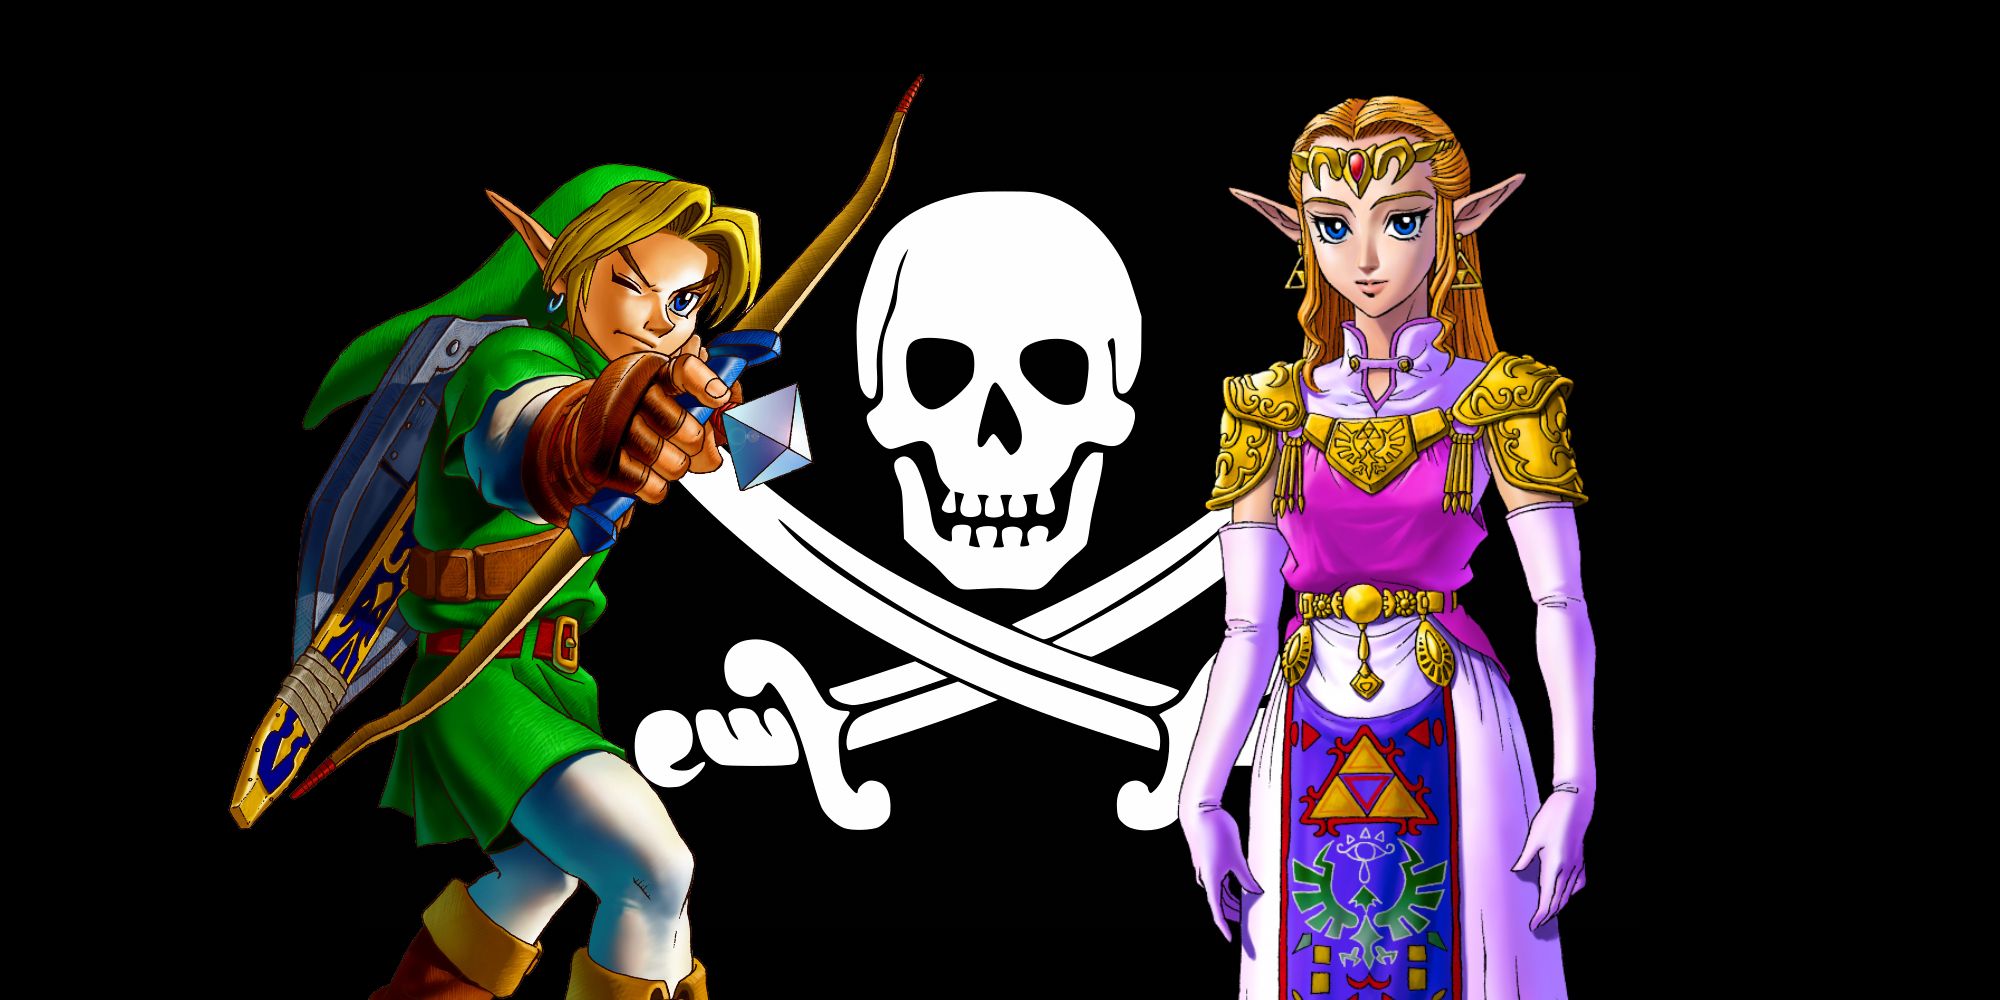 Official artworks of Link and Zelda from Ocarina of Time placed in front of Calico Jack's Jolly Roger pirate flag.